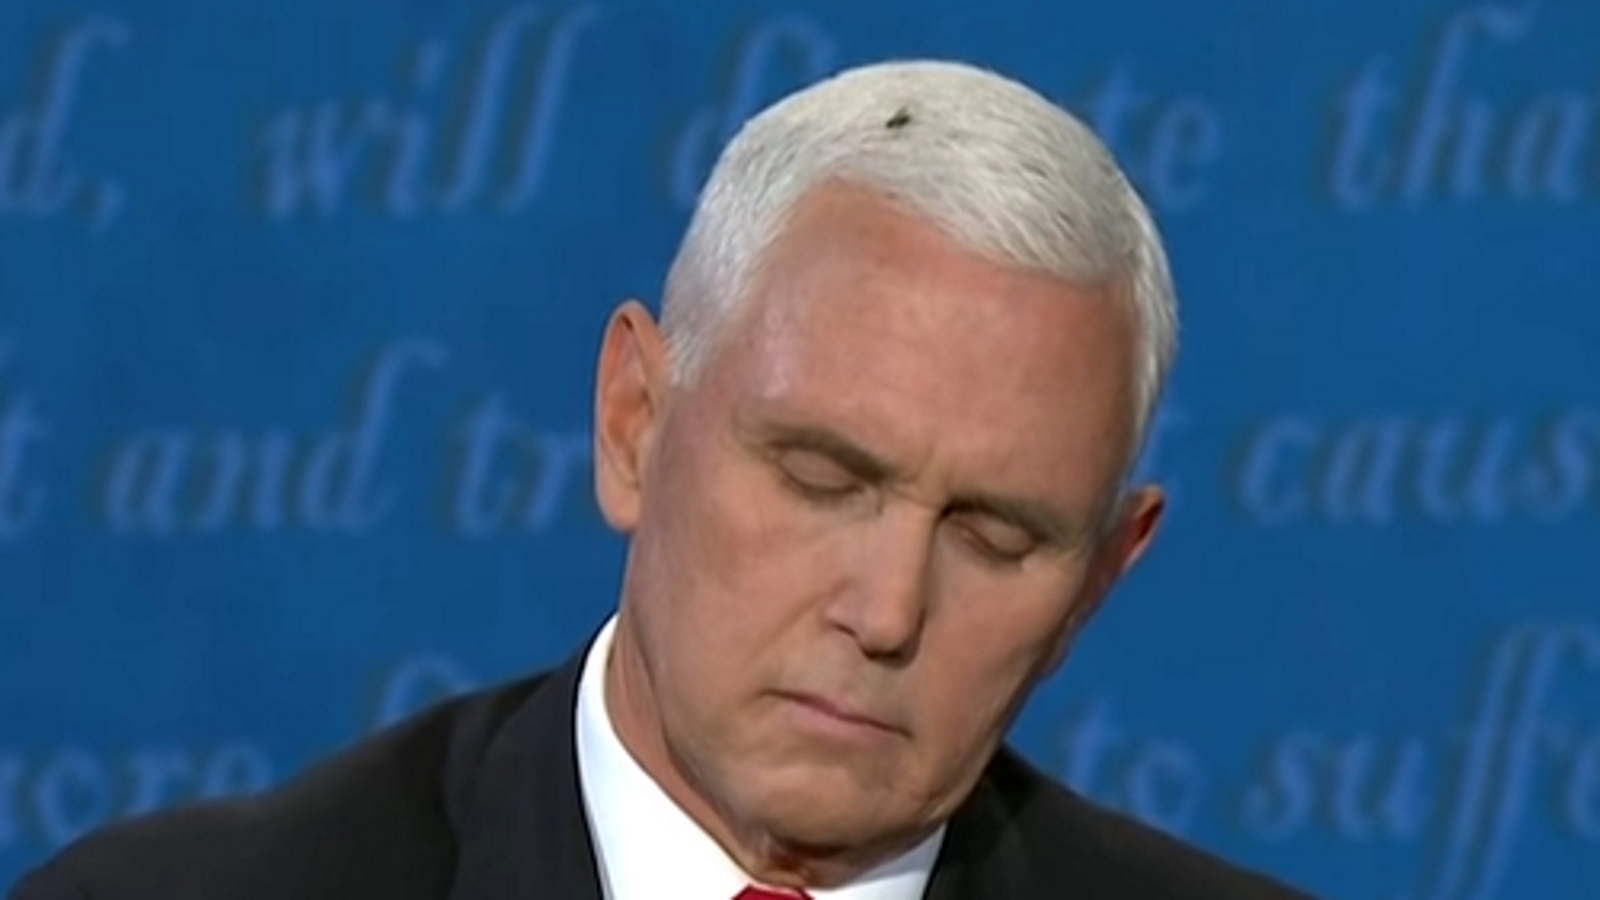 A fly rests on the head of US Vice President Mike Pence with his eyes closed